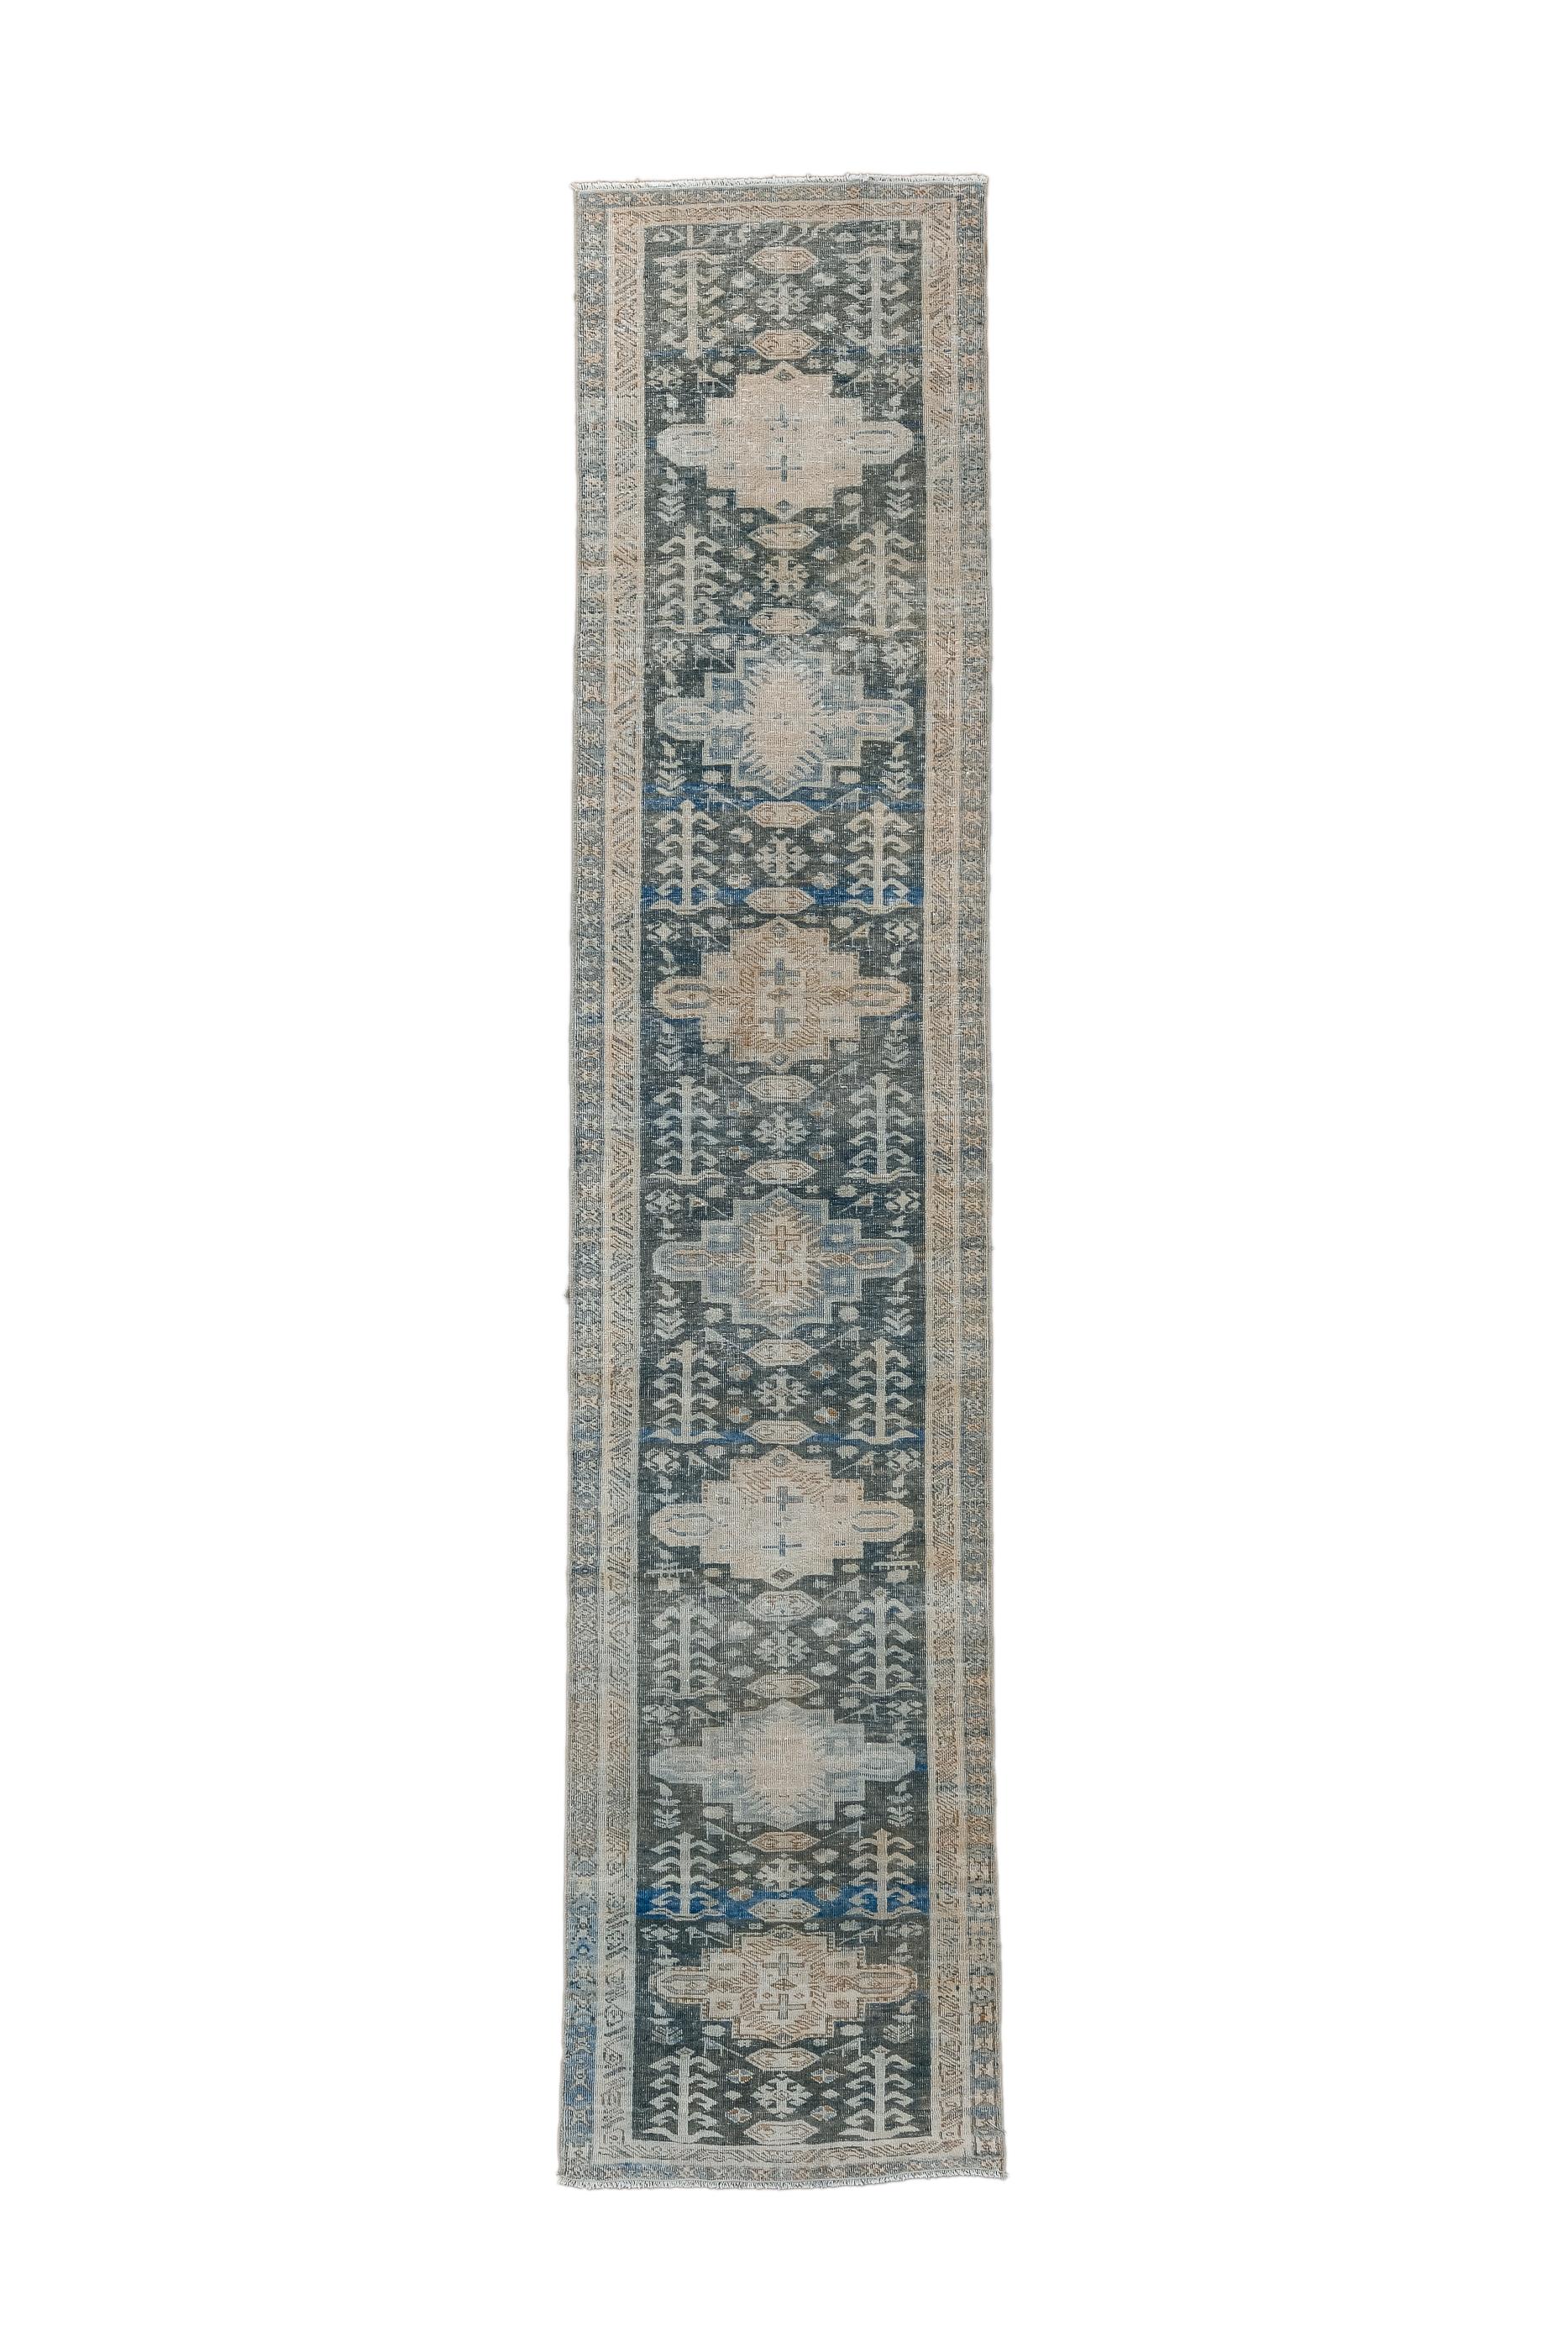 The ecru field is centred by a long pole medallion of nine connected and stepped diamonds. Similar connected half diamonds form lateral poles alongside. Details in blue and pistachio. Royal blue border of attenuated, hanging botehs on a stretch